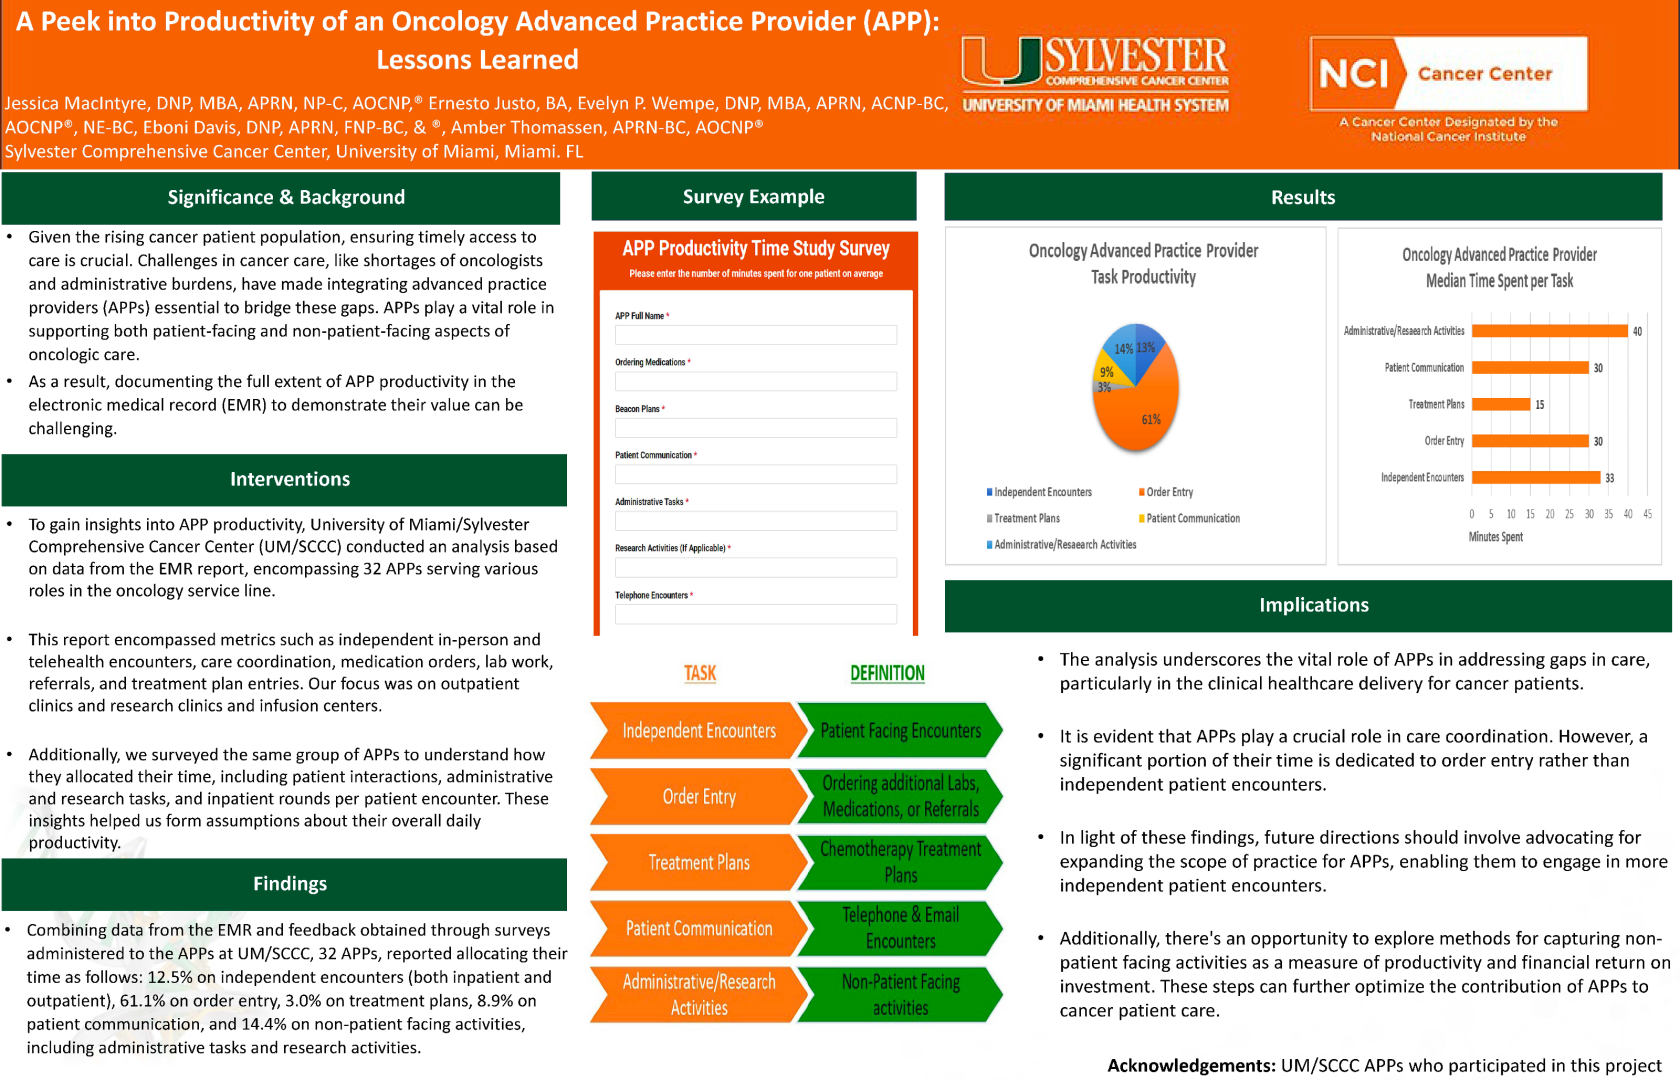 JL1103C: A Peek into Productivity of an Oncology Advanced Practice Provider (APP): Lessons Learned icon